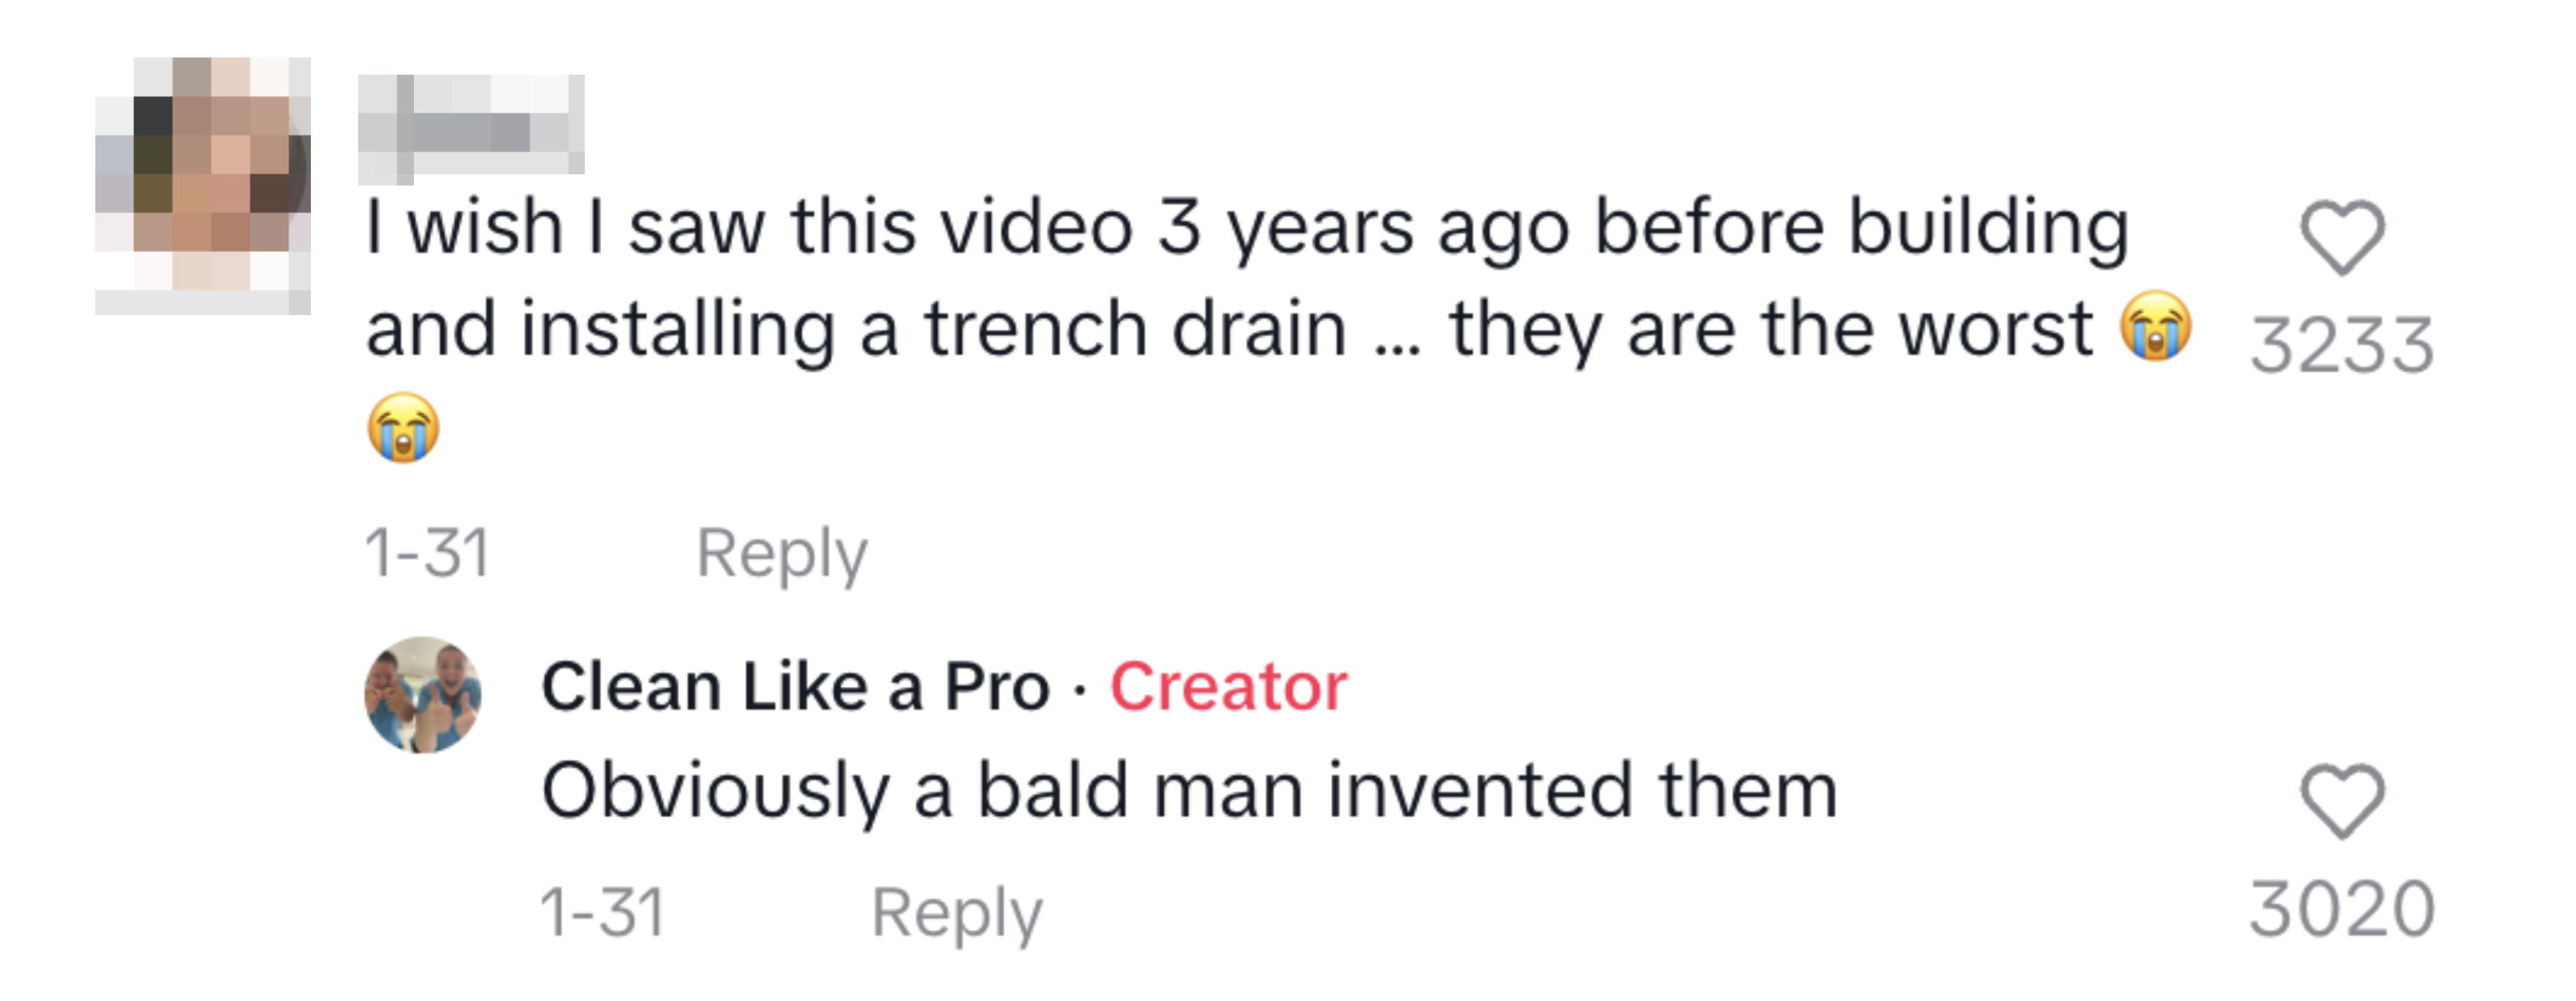 Two comments on a video expresses regret about a past DIY project, while another jokes about trench drains&#x27; invention